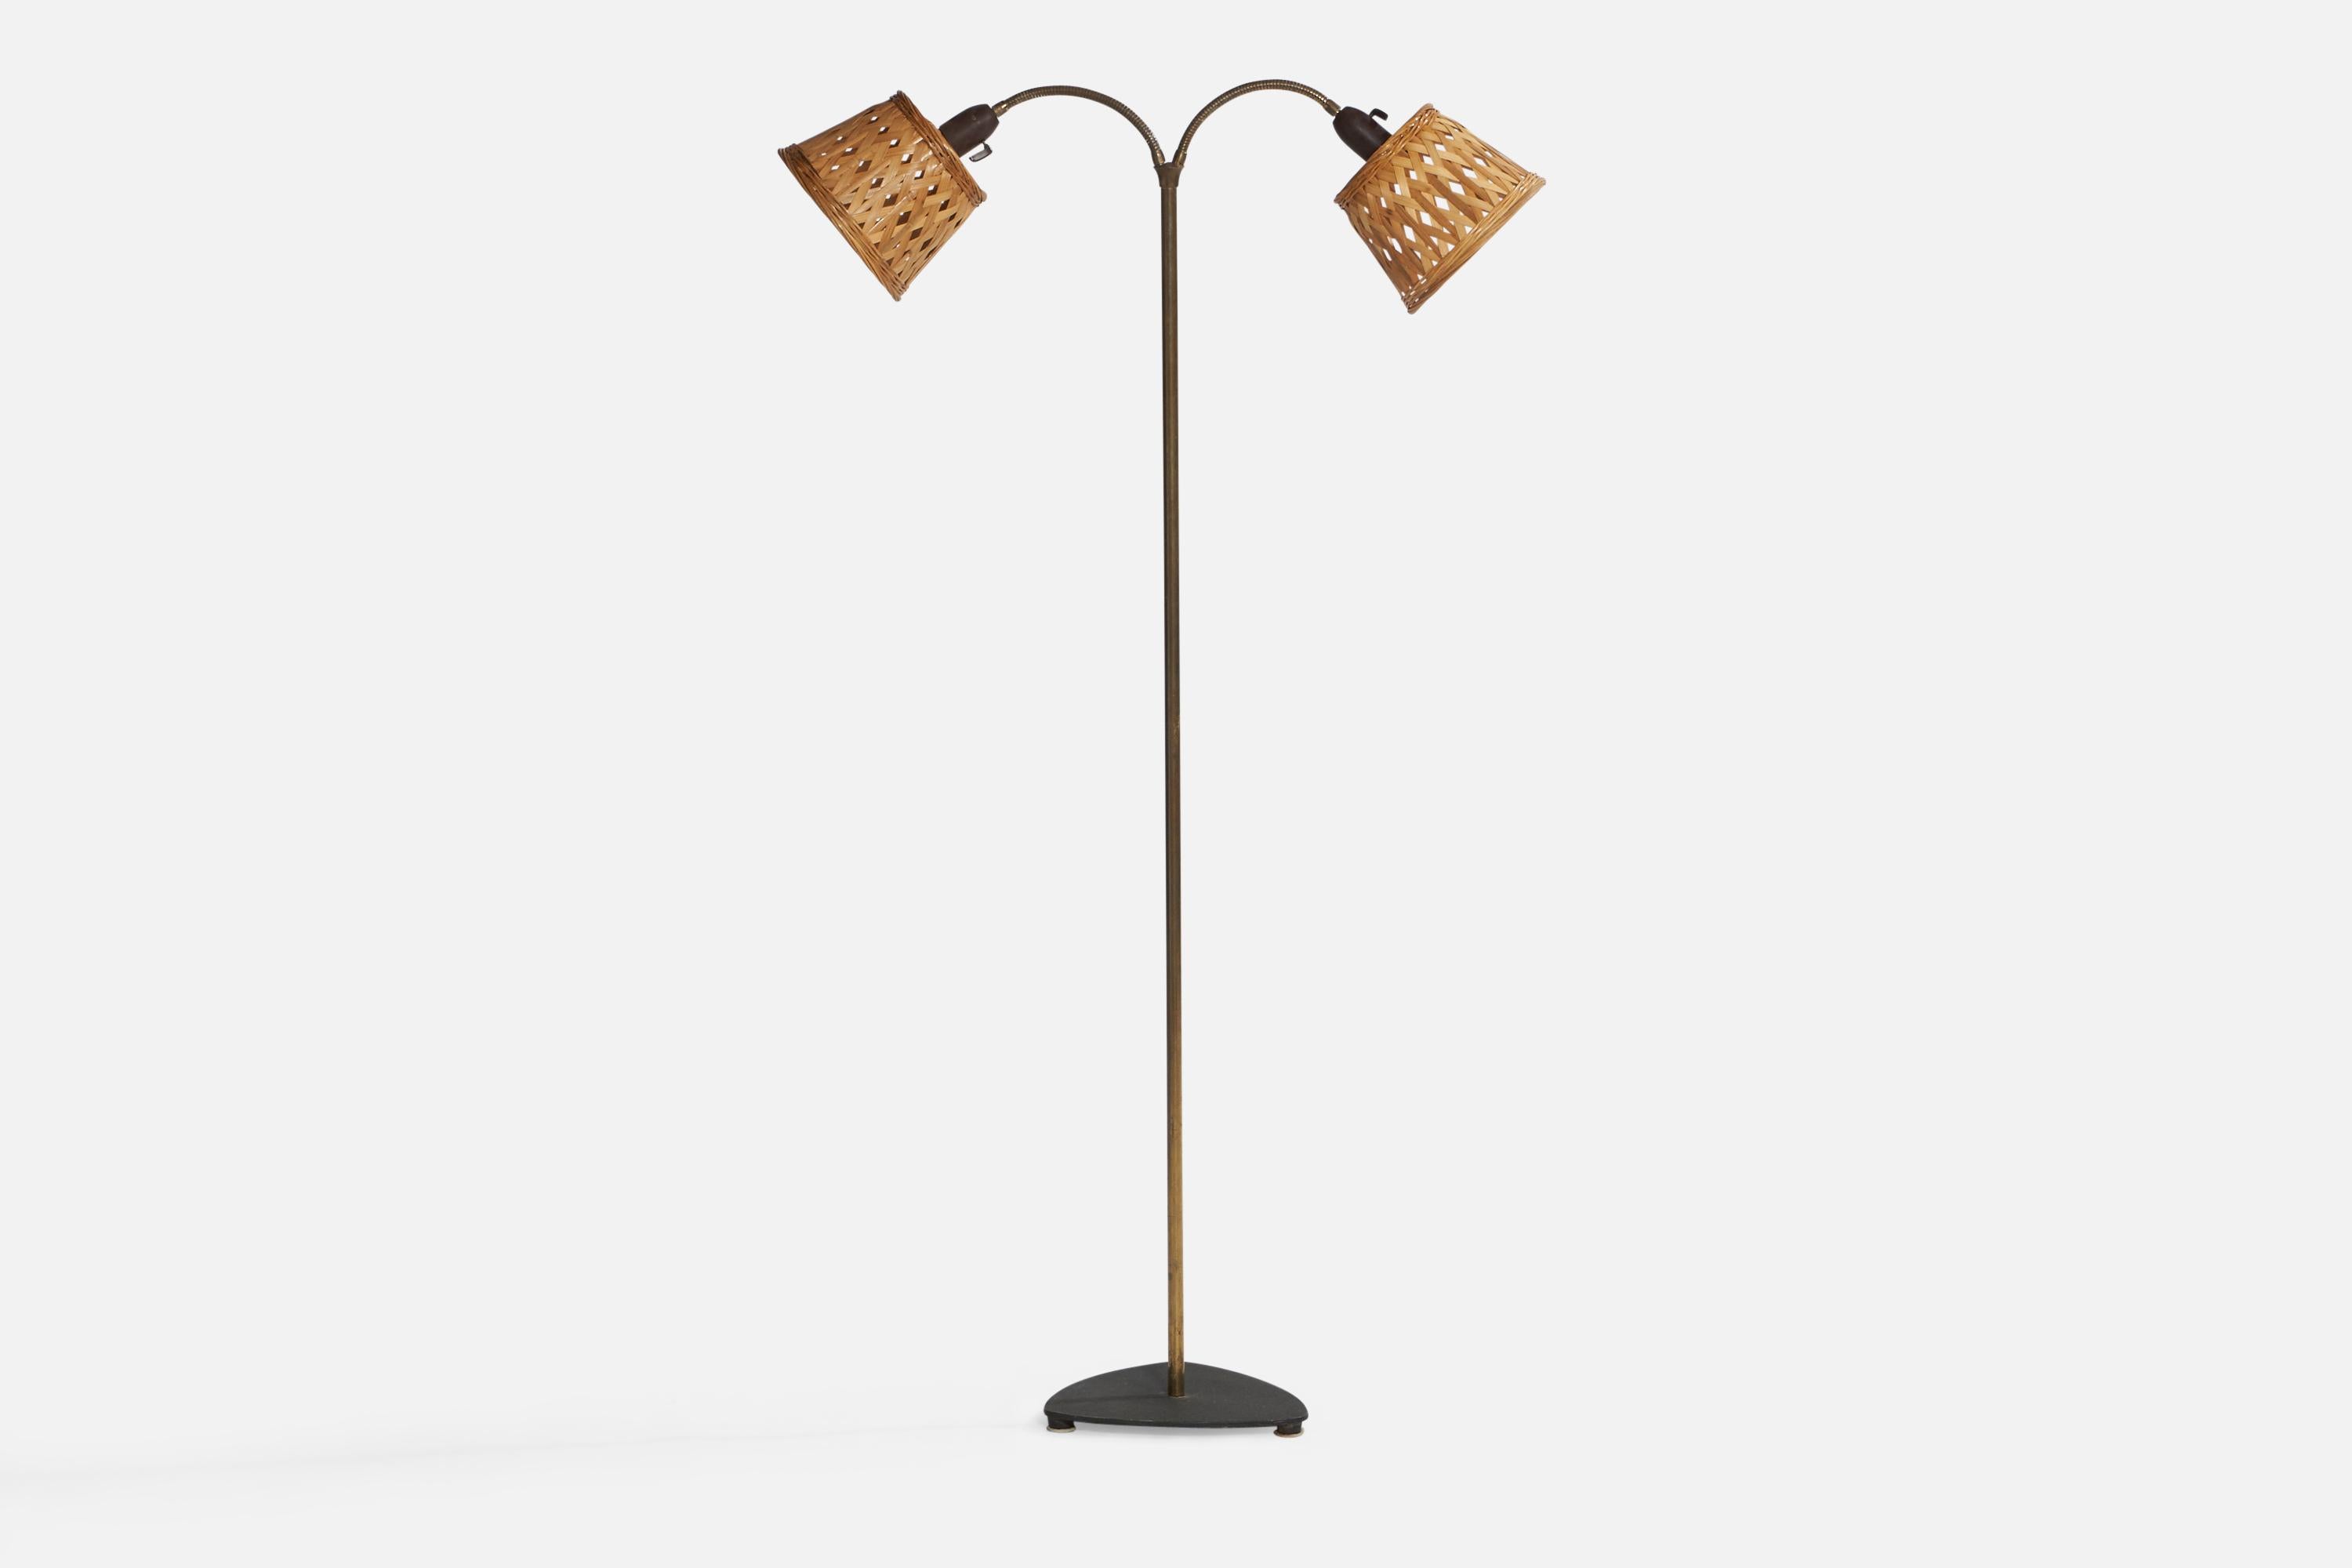 A brass, black-lacquered iron, bakelite and rattan floor lamp designed and produced in Denmark, 1940s.

Overall Dimensions (inches): 53.3” x 25.5” W x 20” D. Stated dimensions include shades.
Dimensions vary based on position of lights.
Bulb